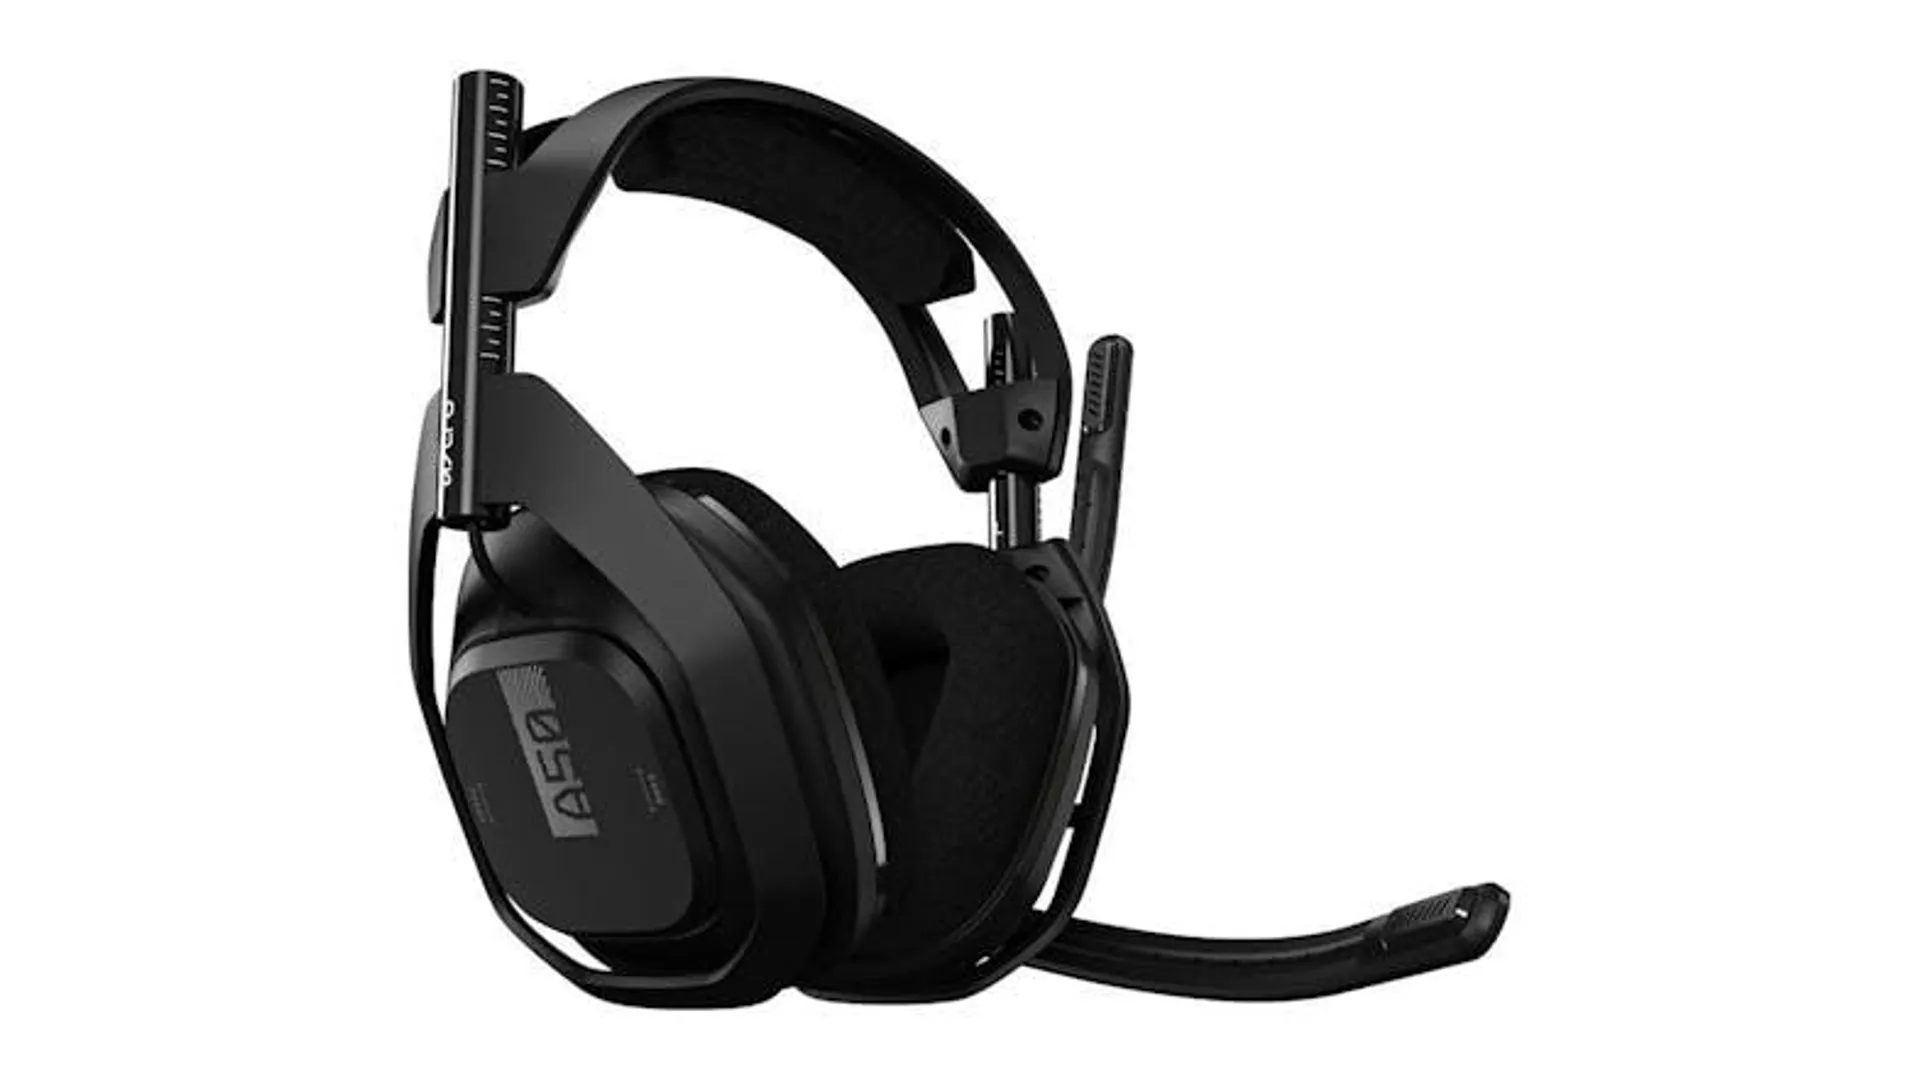 Astro A50 Wireless Gaming Headset - Black/Grey